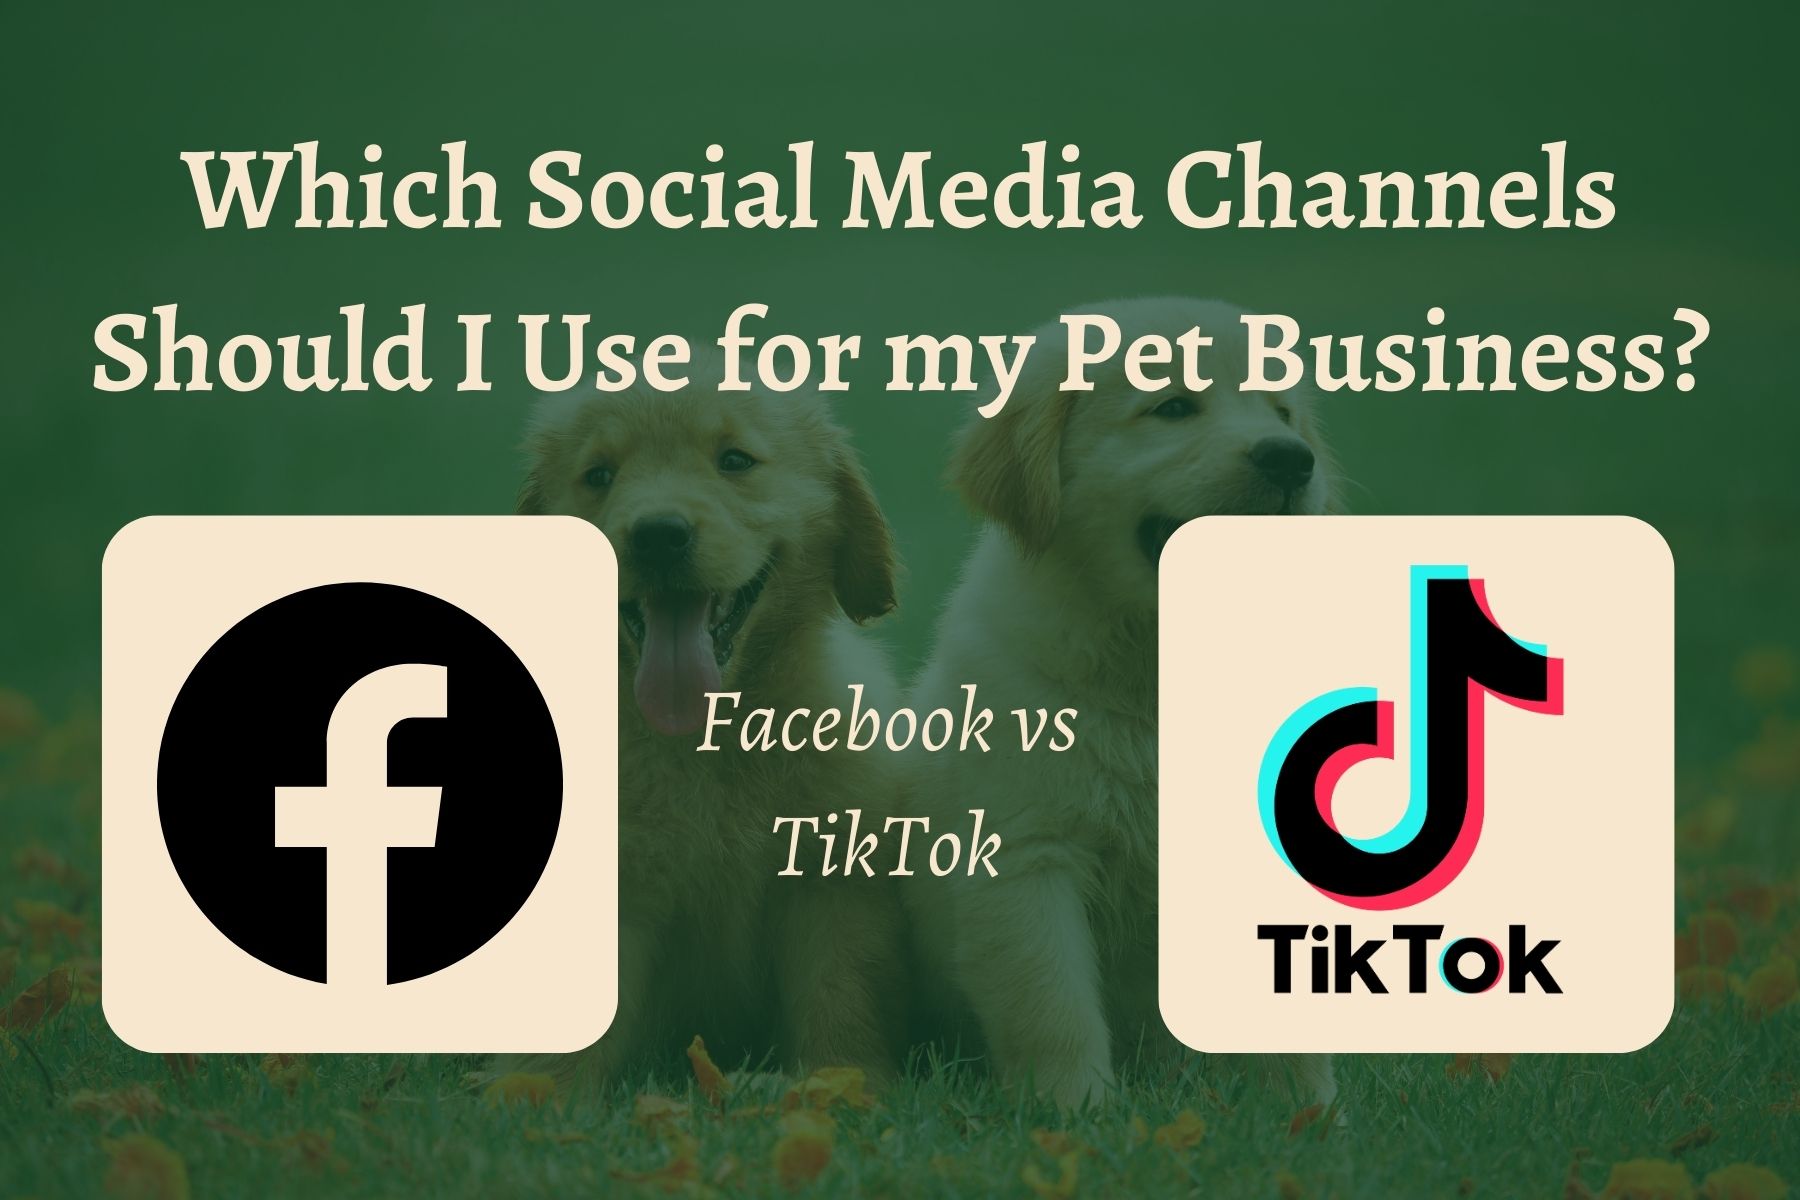 Facebook vs TikTok: Which Can I Use to Advertise my Pet Business?